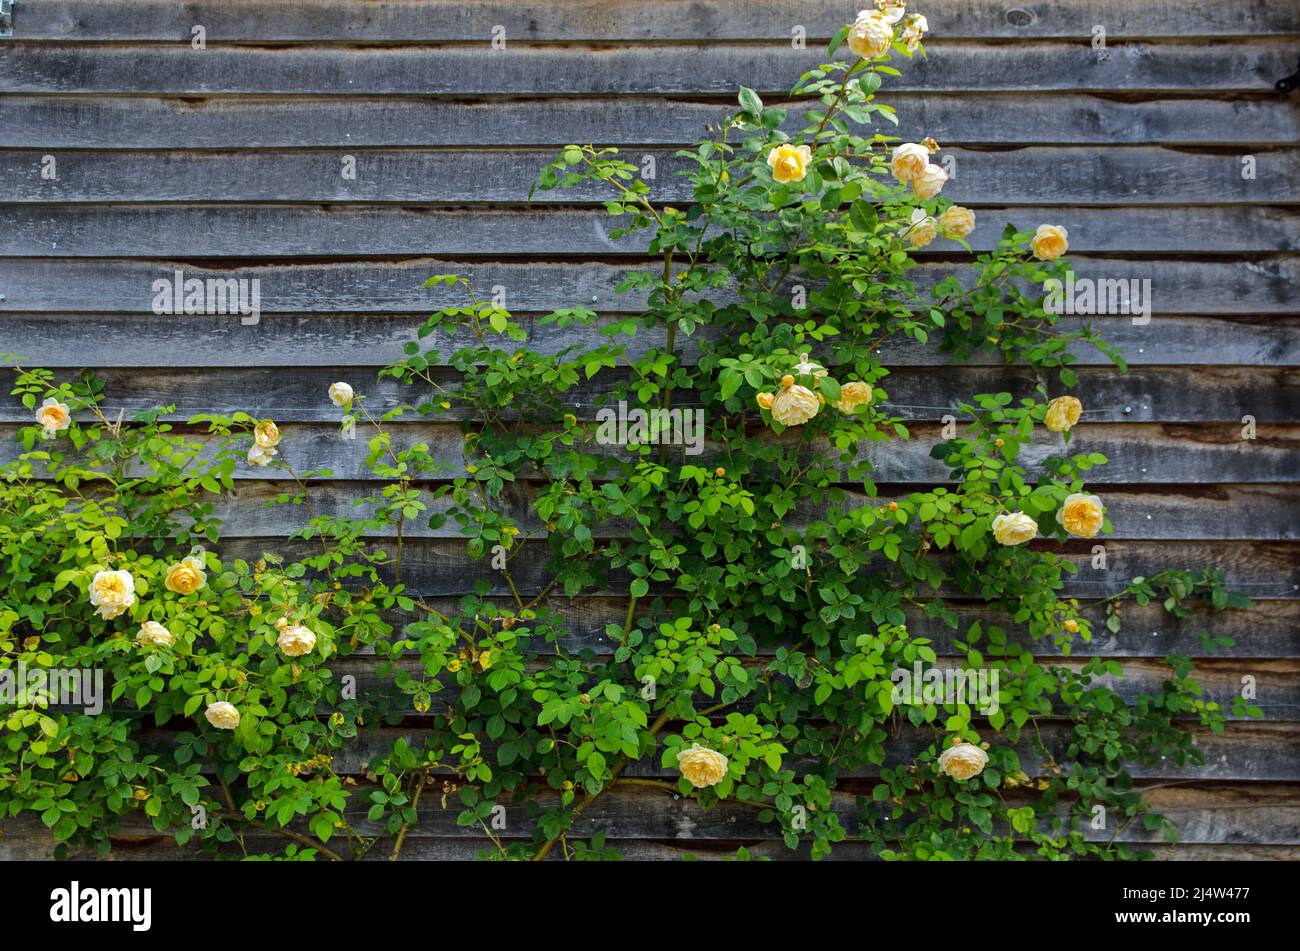 Yellow rose climbing up a wooden fence in late summer. Stock Photo